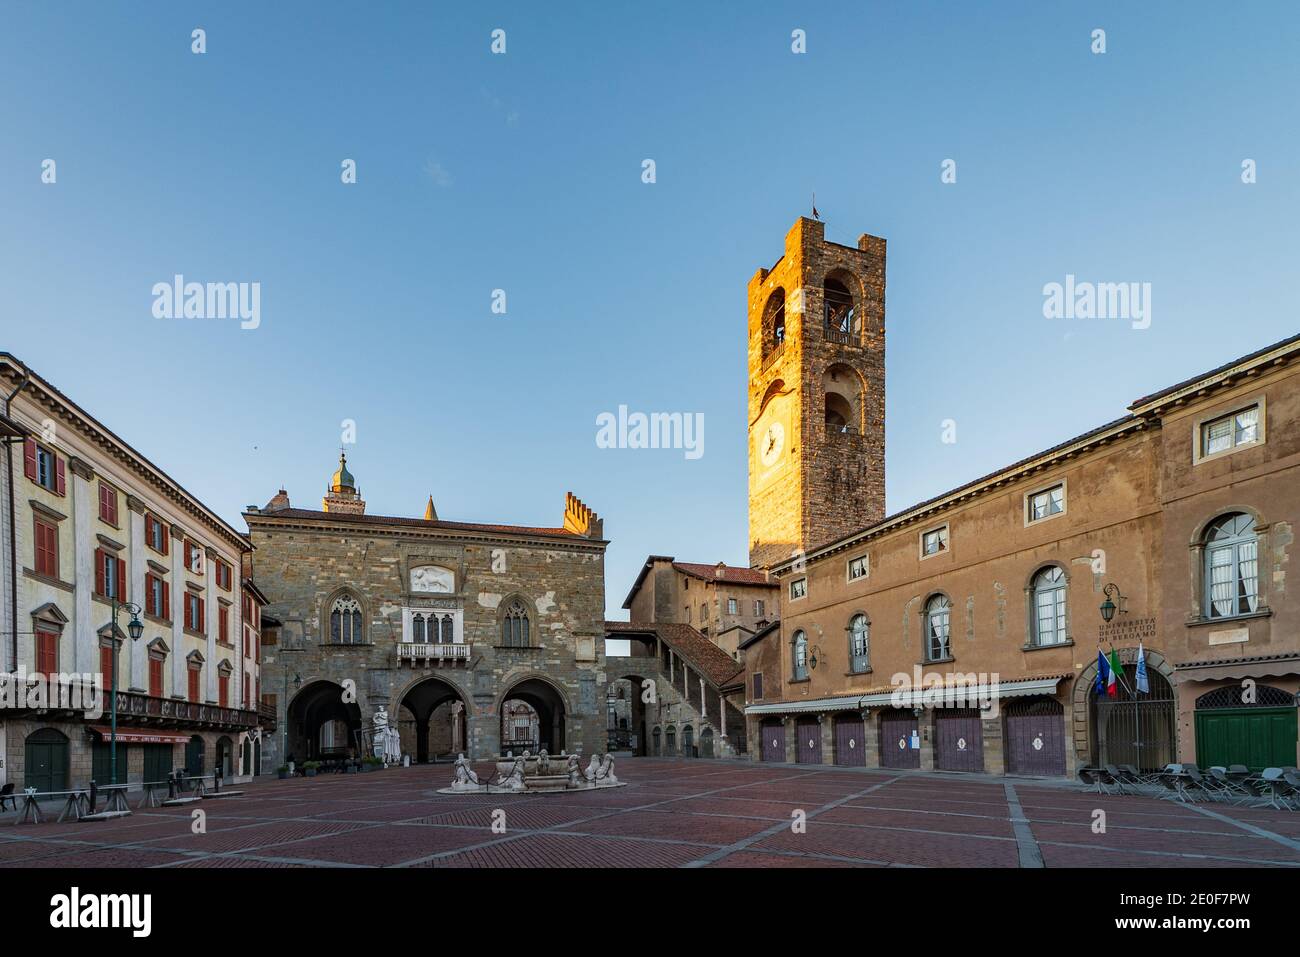 Panorama of Piazza Vecchia with the Contarini Fountain and in the background the Palazzo della Ragione and the bell tower called Campanone in Piazza V Stock Photo